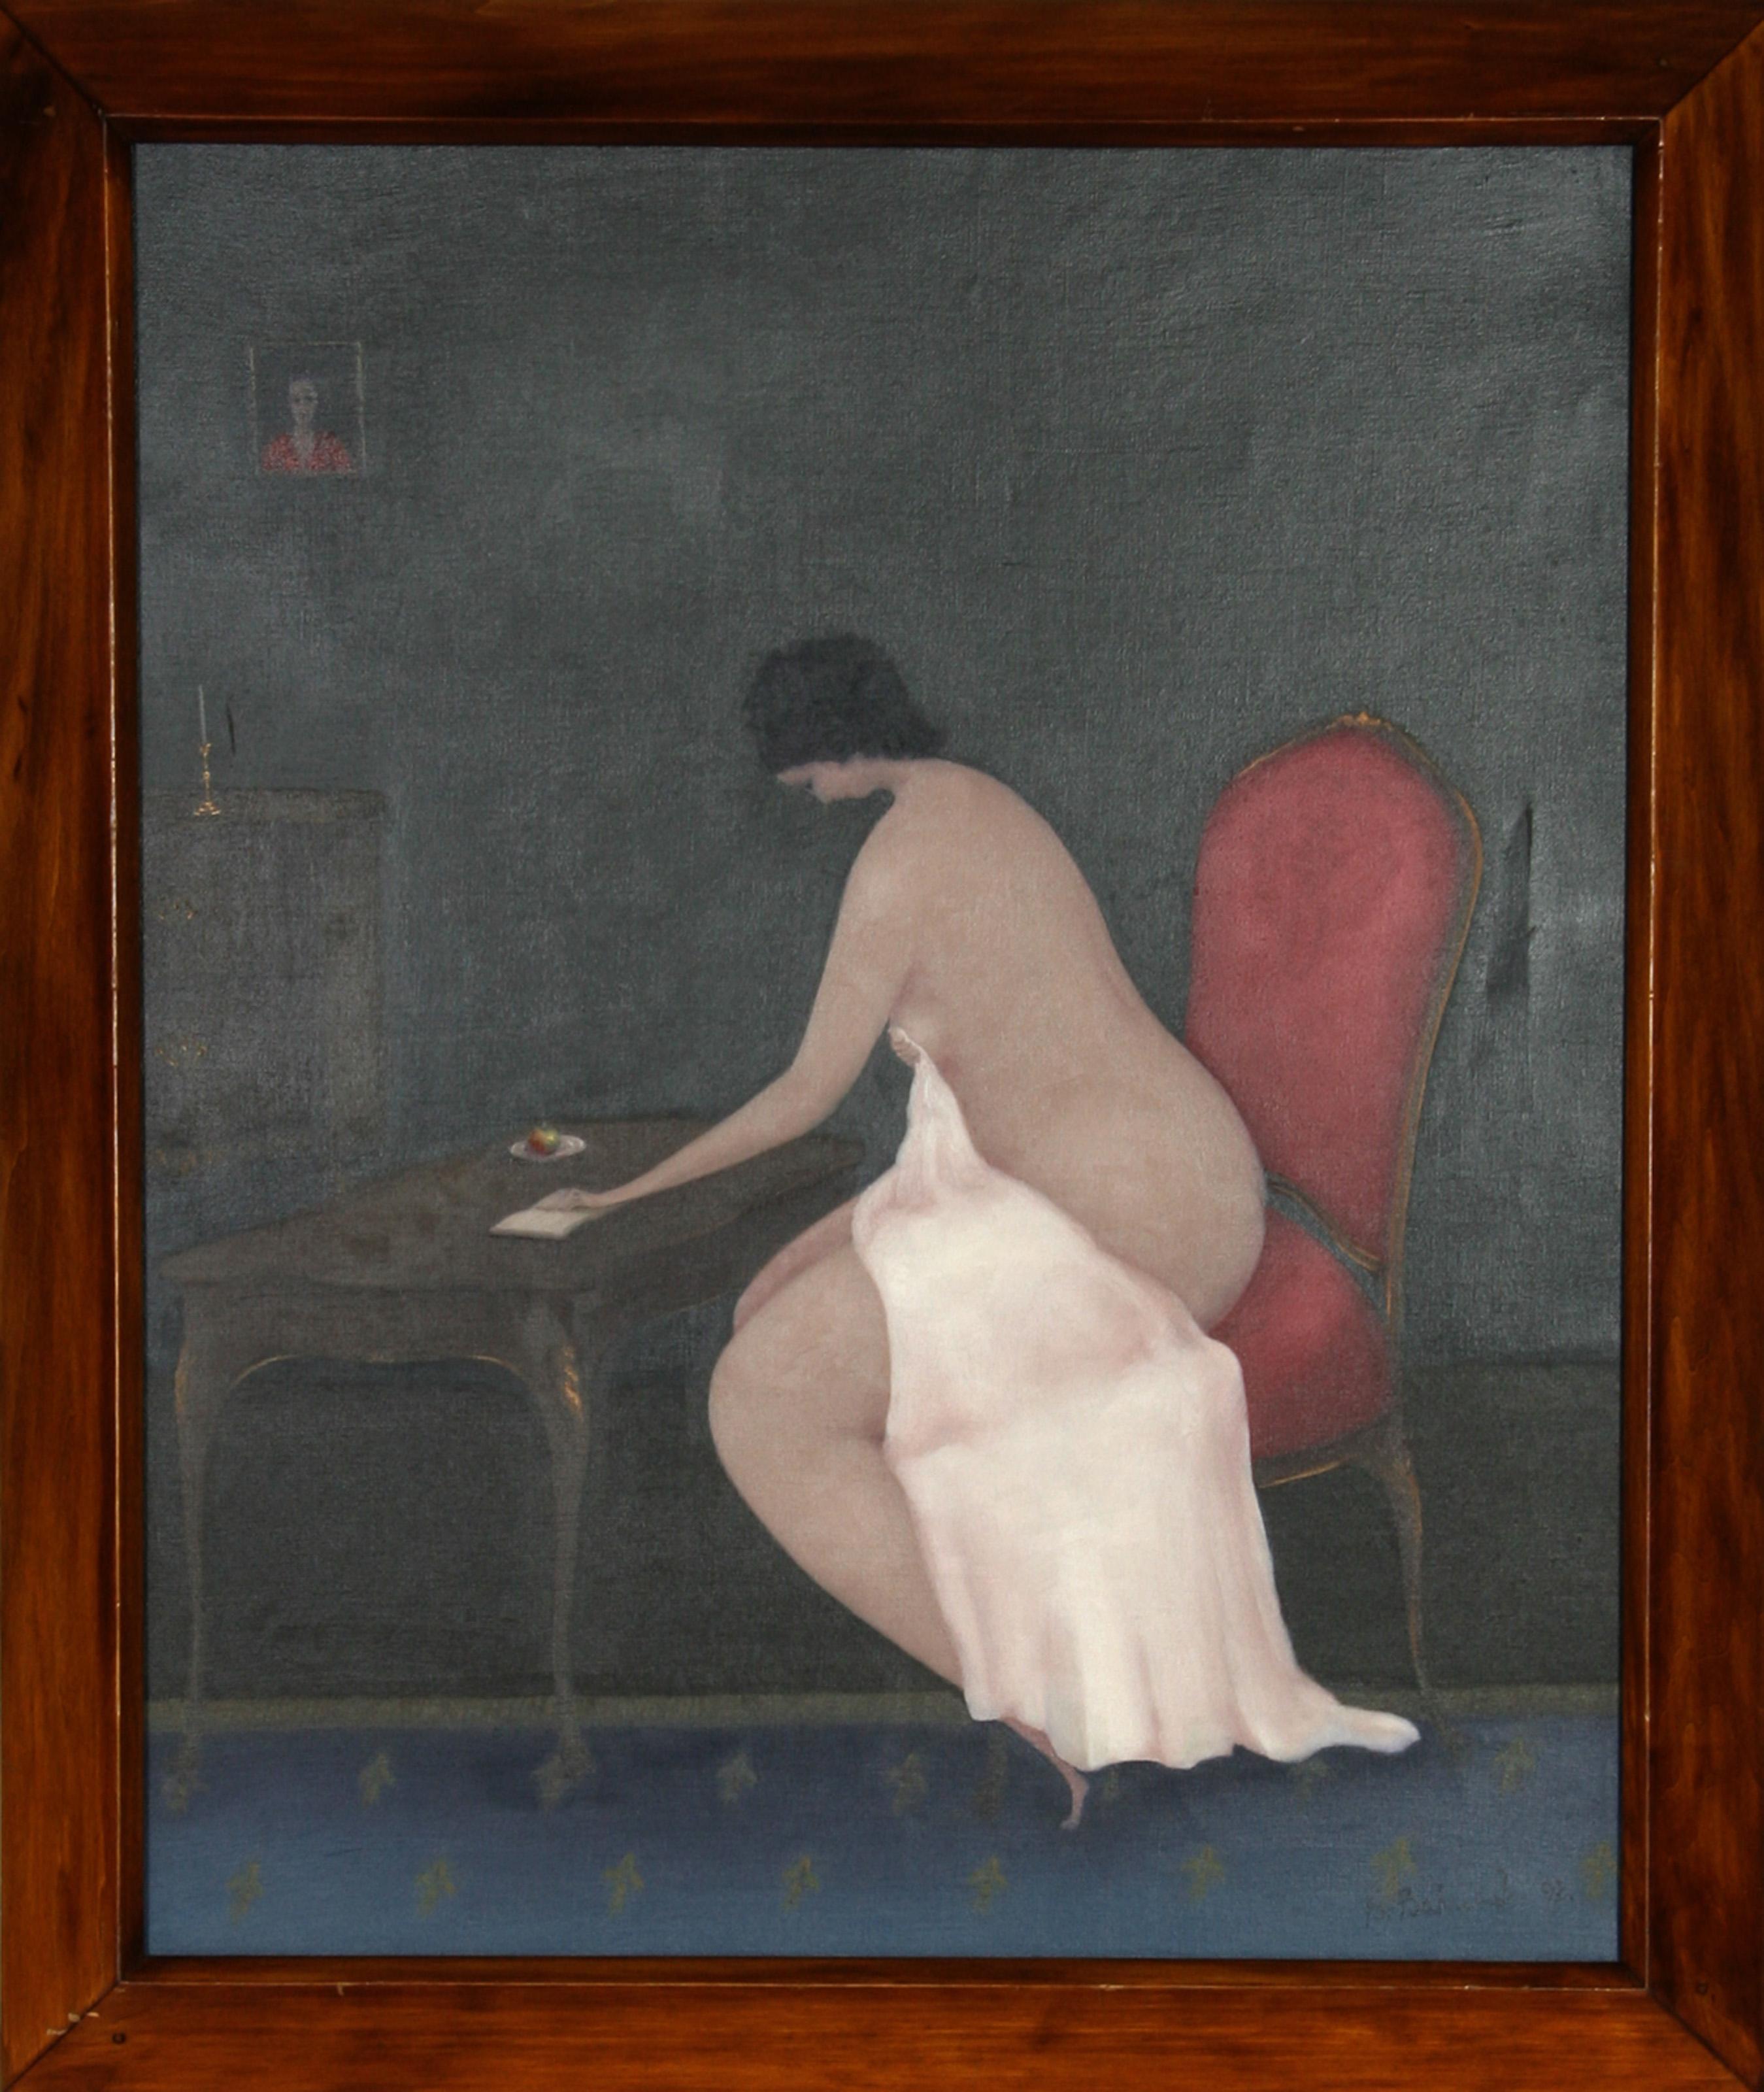 Branko Bahunek, Croatian (1935 - ) -  Woman in Red Chair. Year: 1992, Medium: Oil on Canvas, Size: 25.5 in. x 21 in. (64.77 cm x 53.34 cm), Frame Size: 29 x 25 inches, Description: Leaning over the dainty wooden desk, the brunette woman clutches her